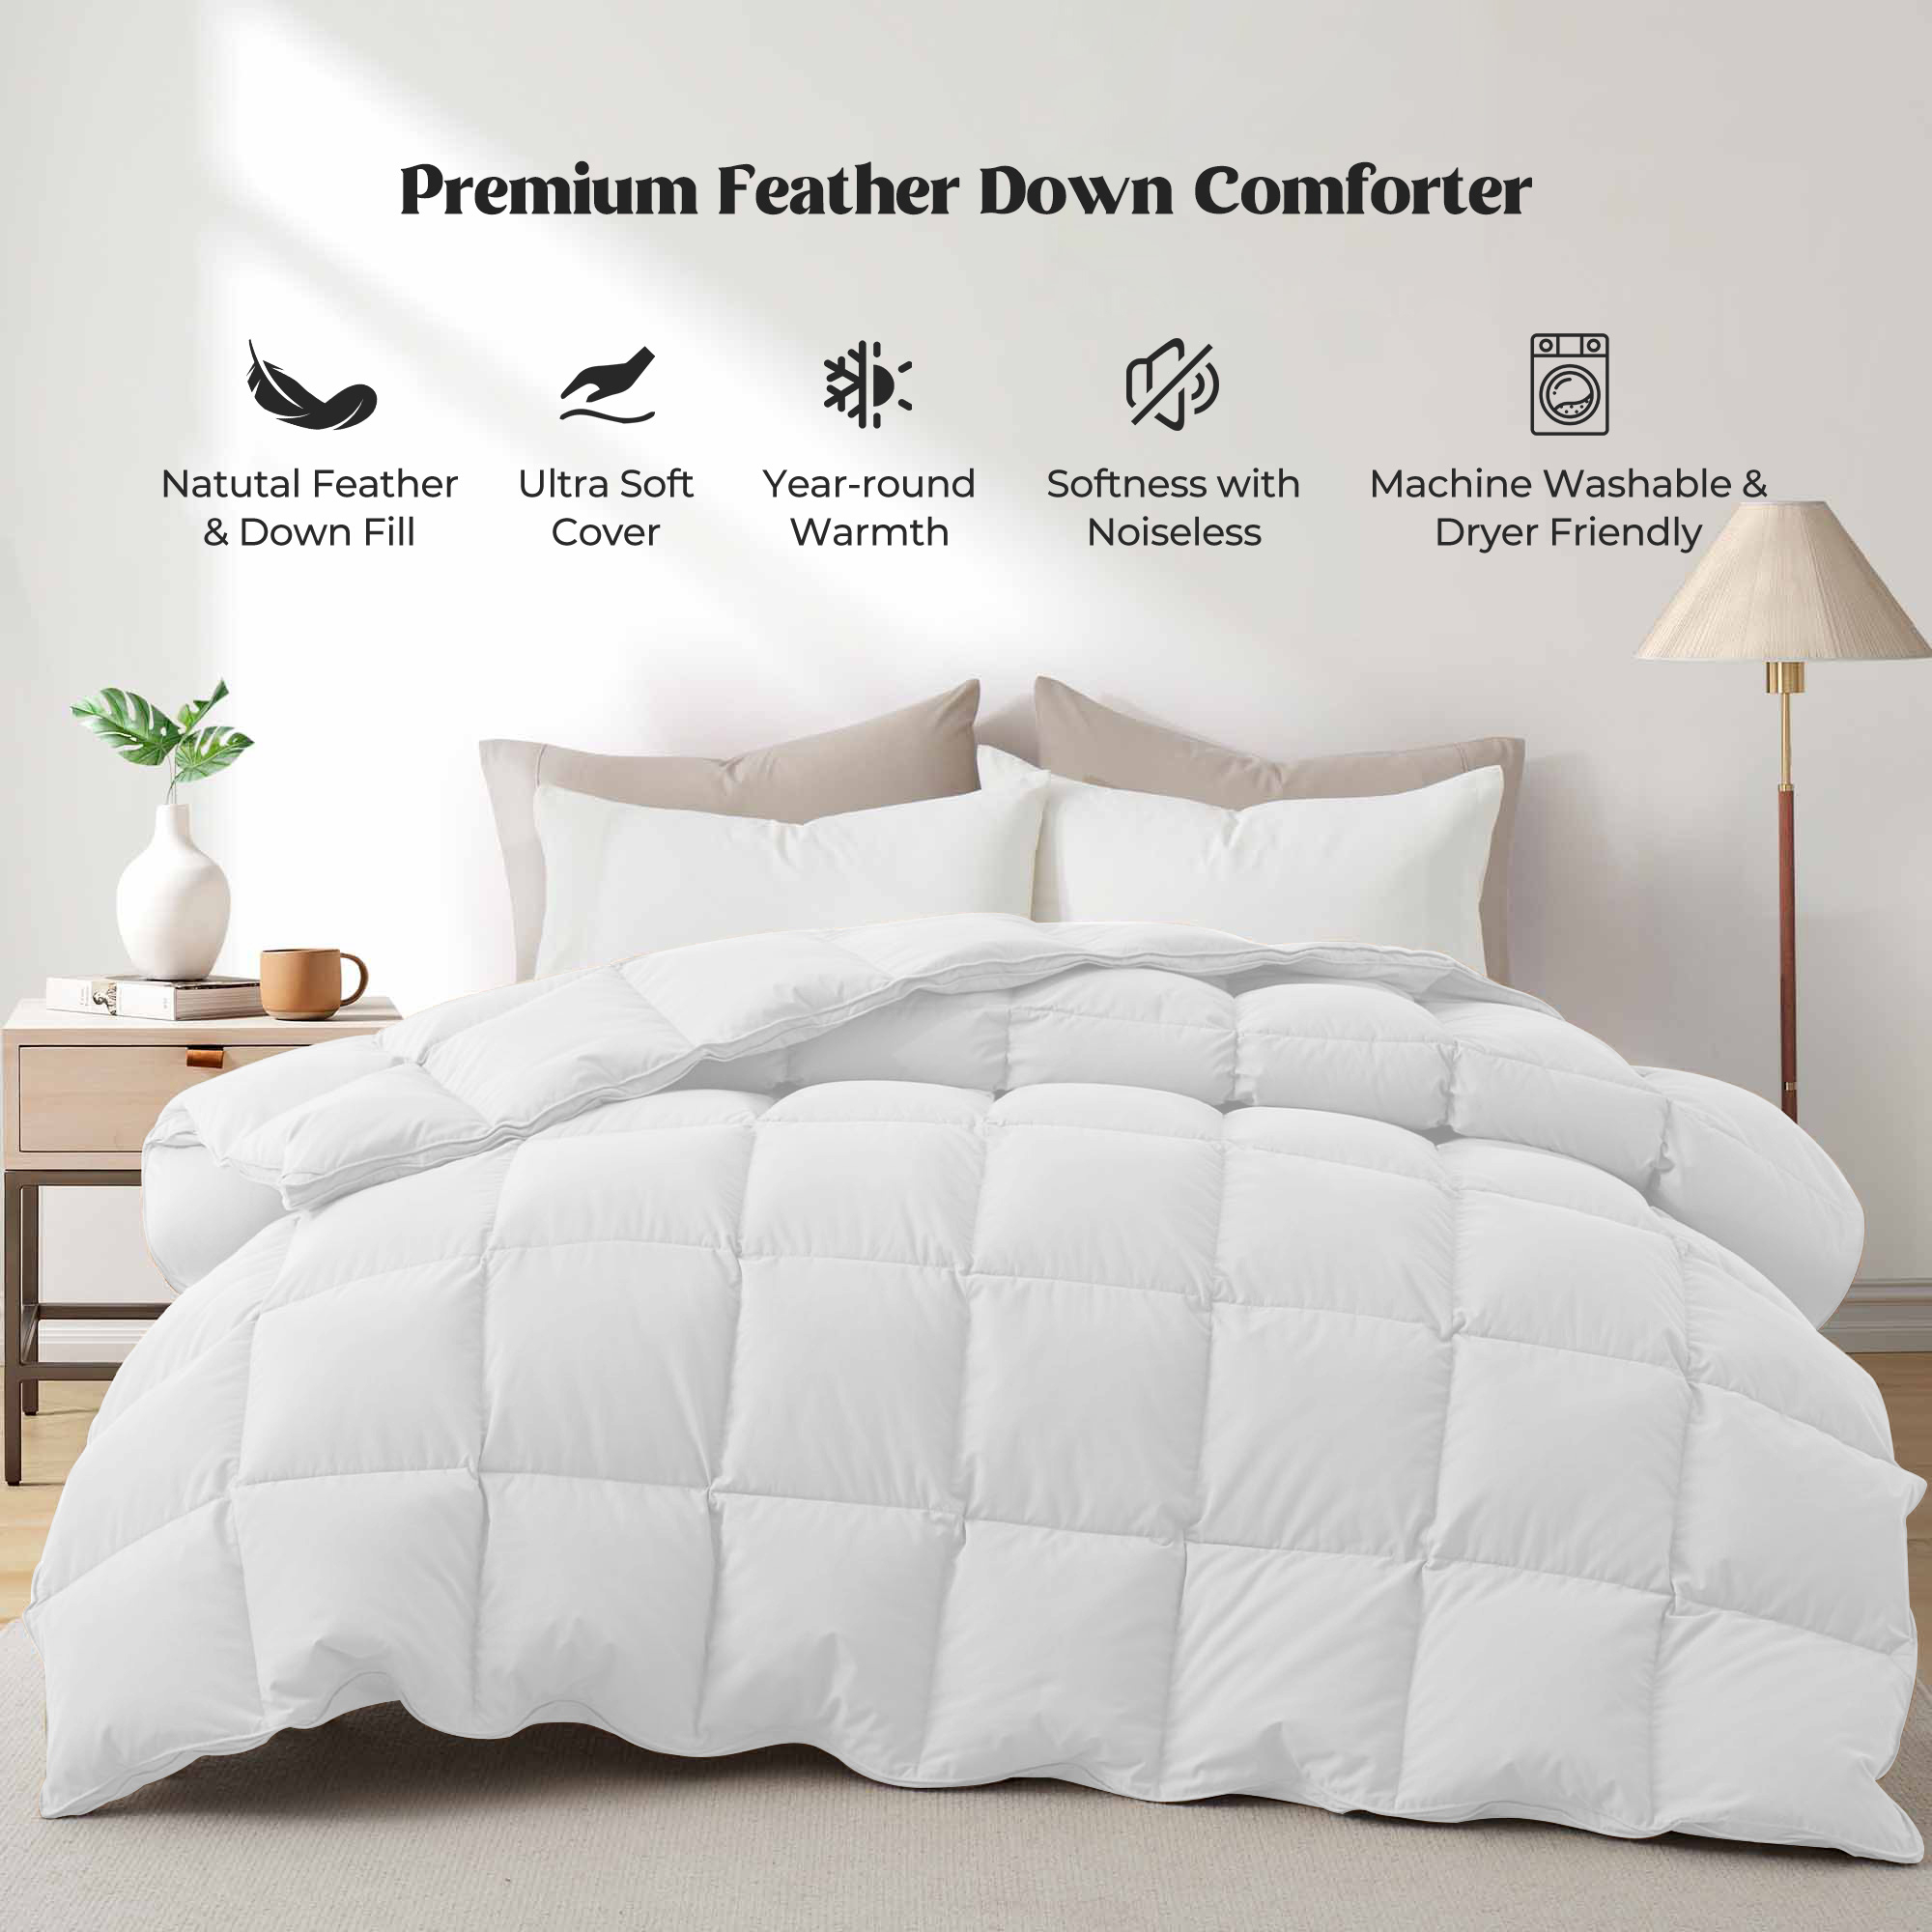 Medium Weight Goose Feather And Down Comforter - White, King